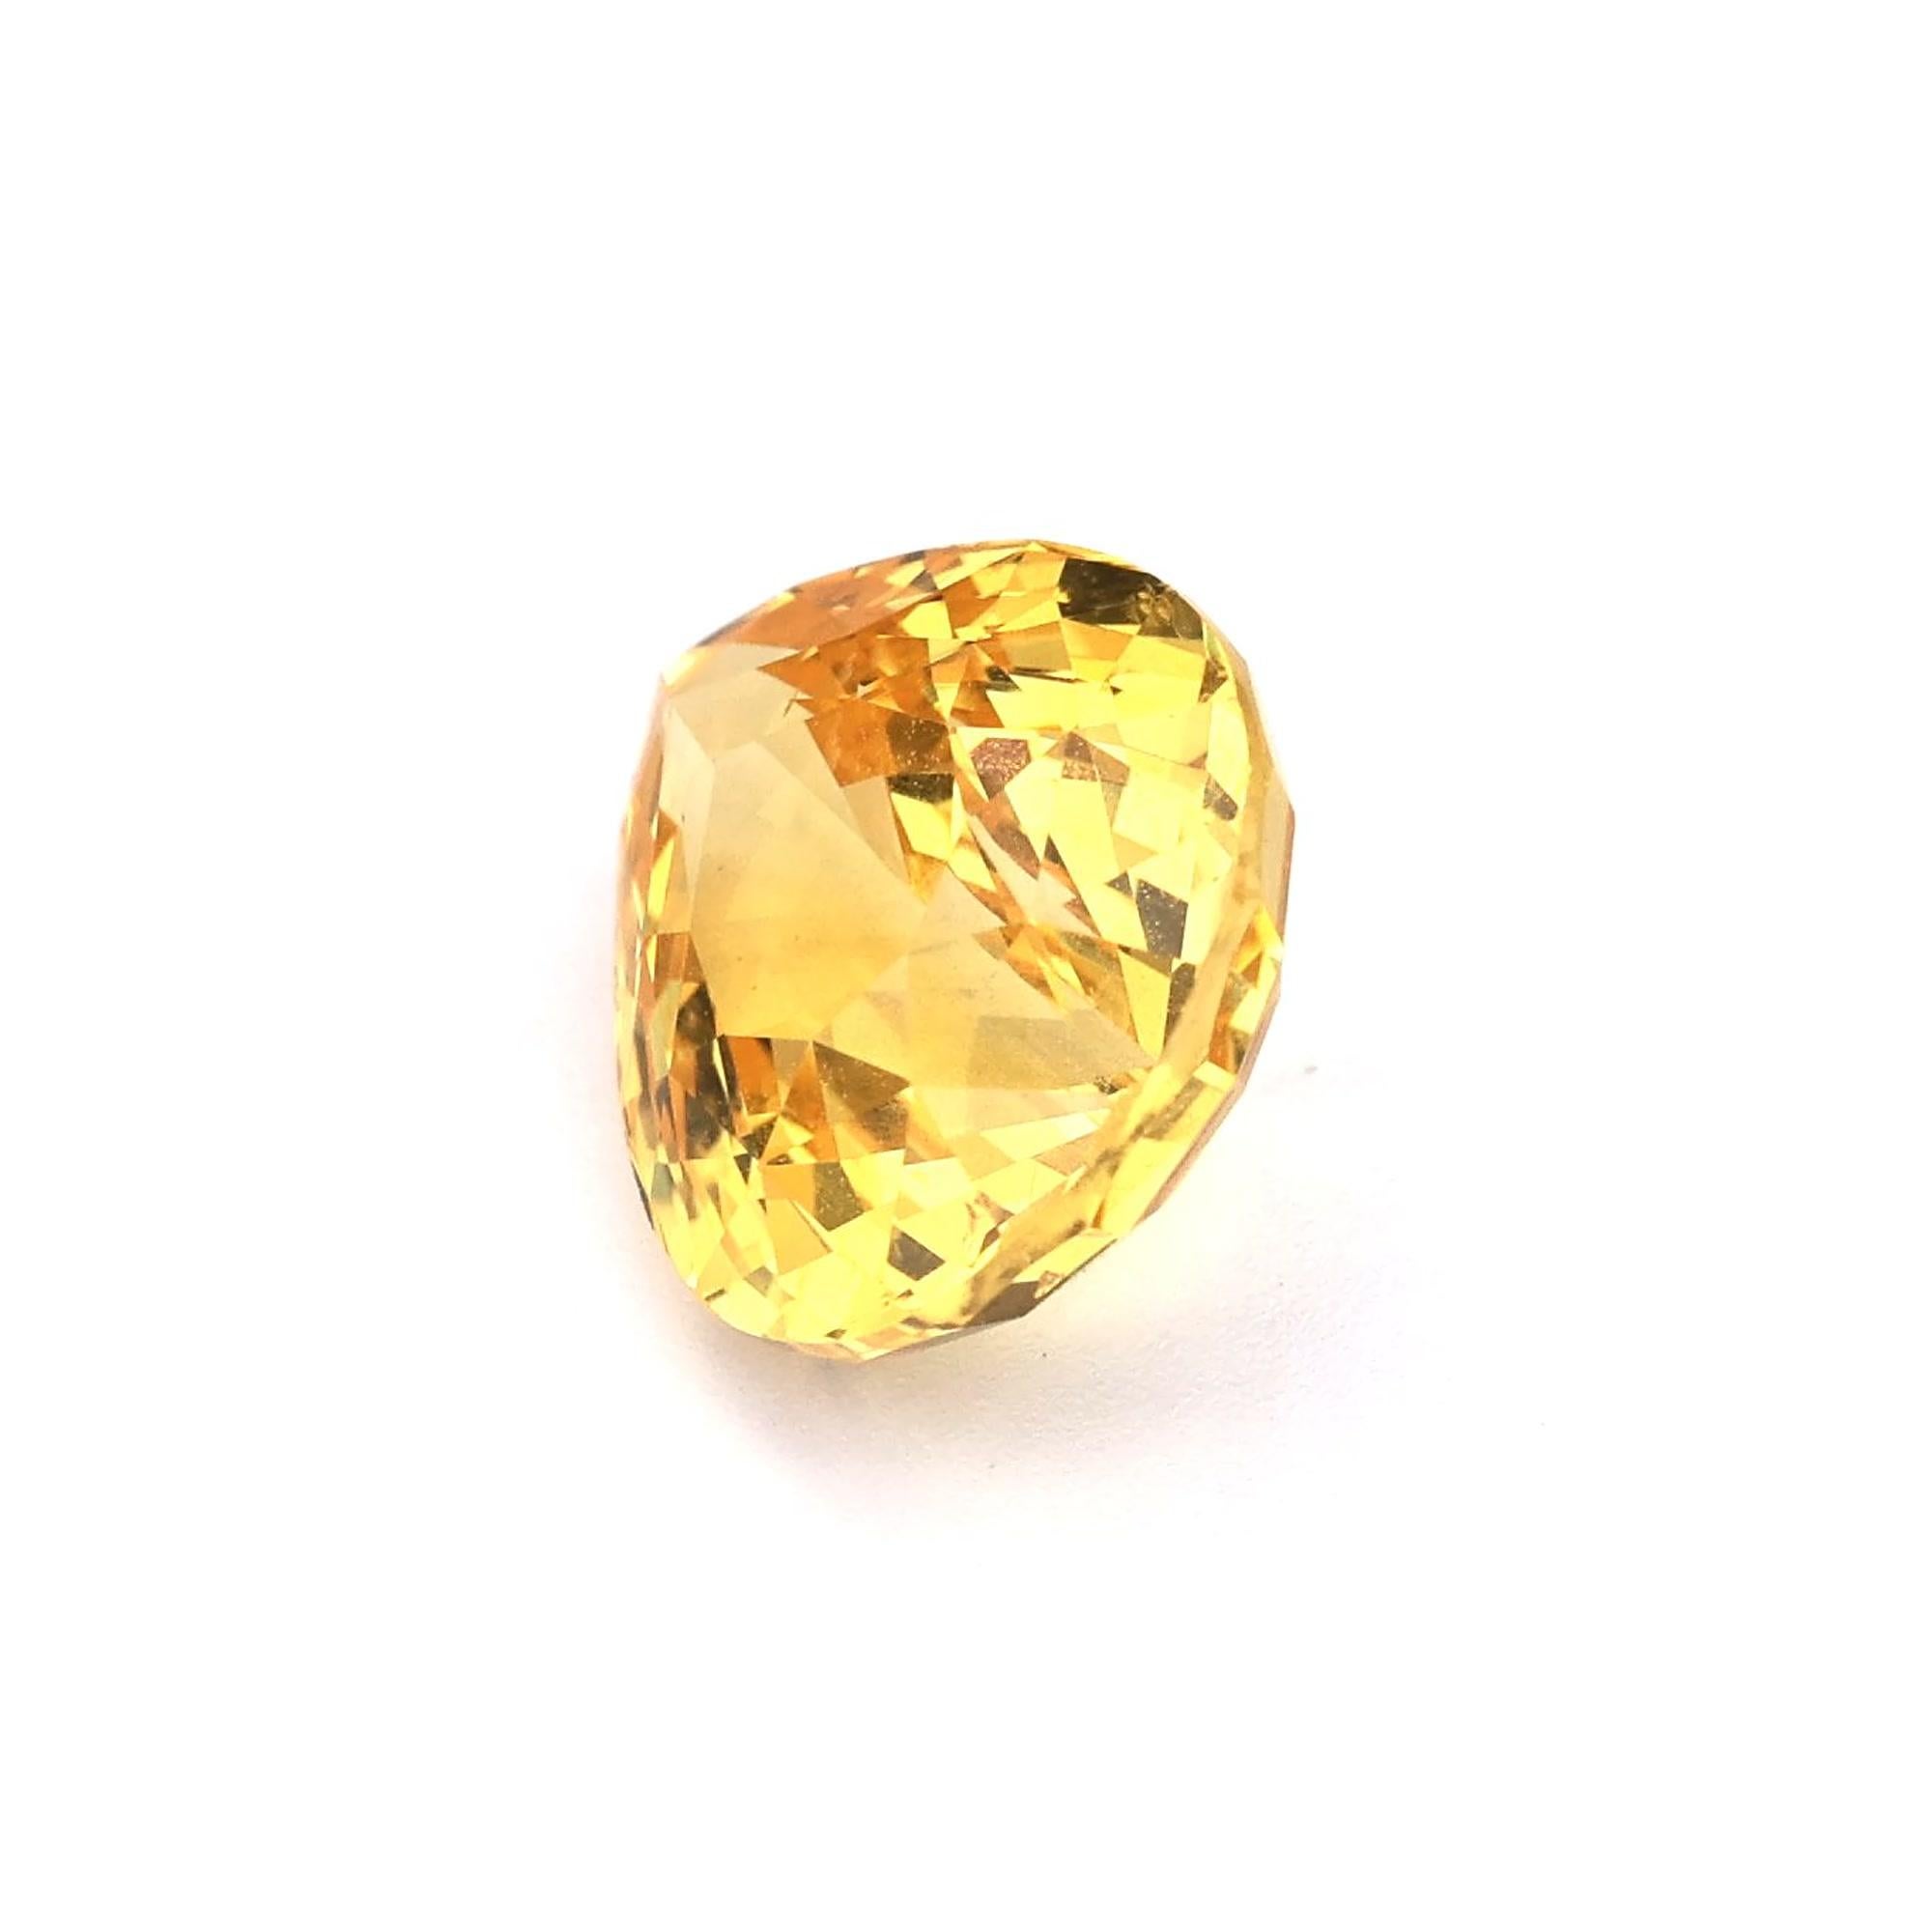 Pear Cut Certified 4.45 ct Natural Yellow Sapphire Pear Shape Ceylon Origin Ring Stone For Sale